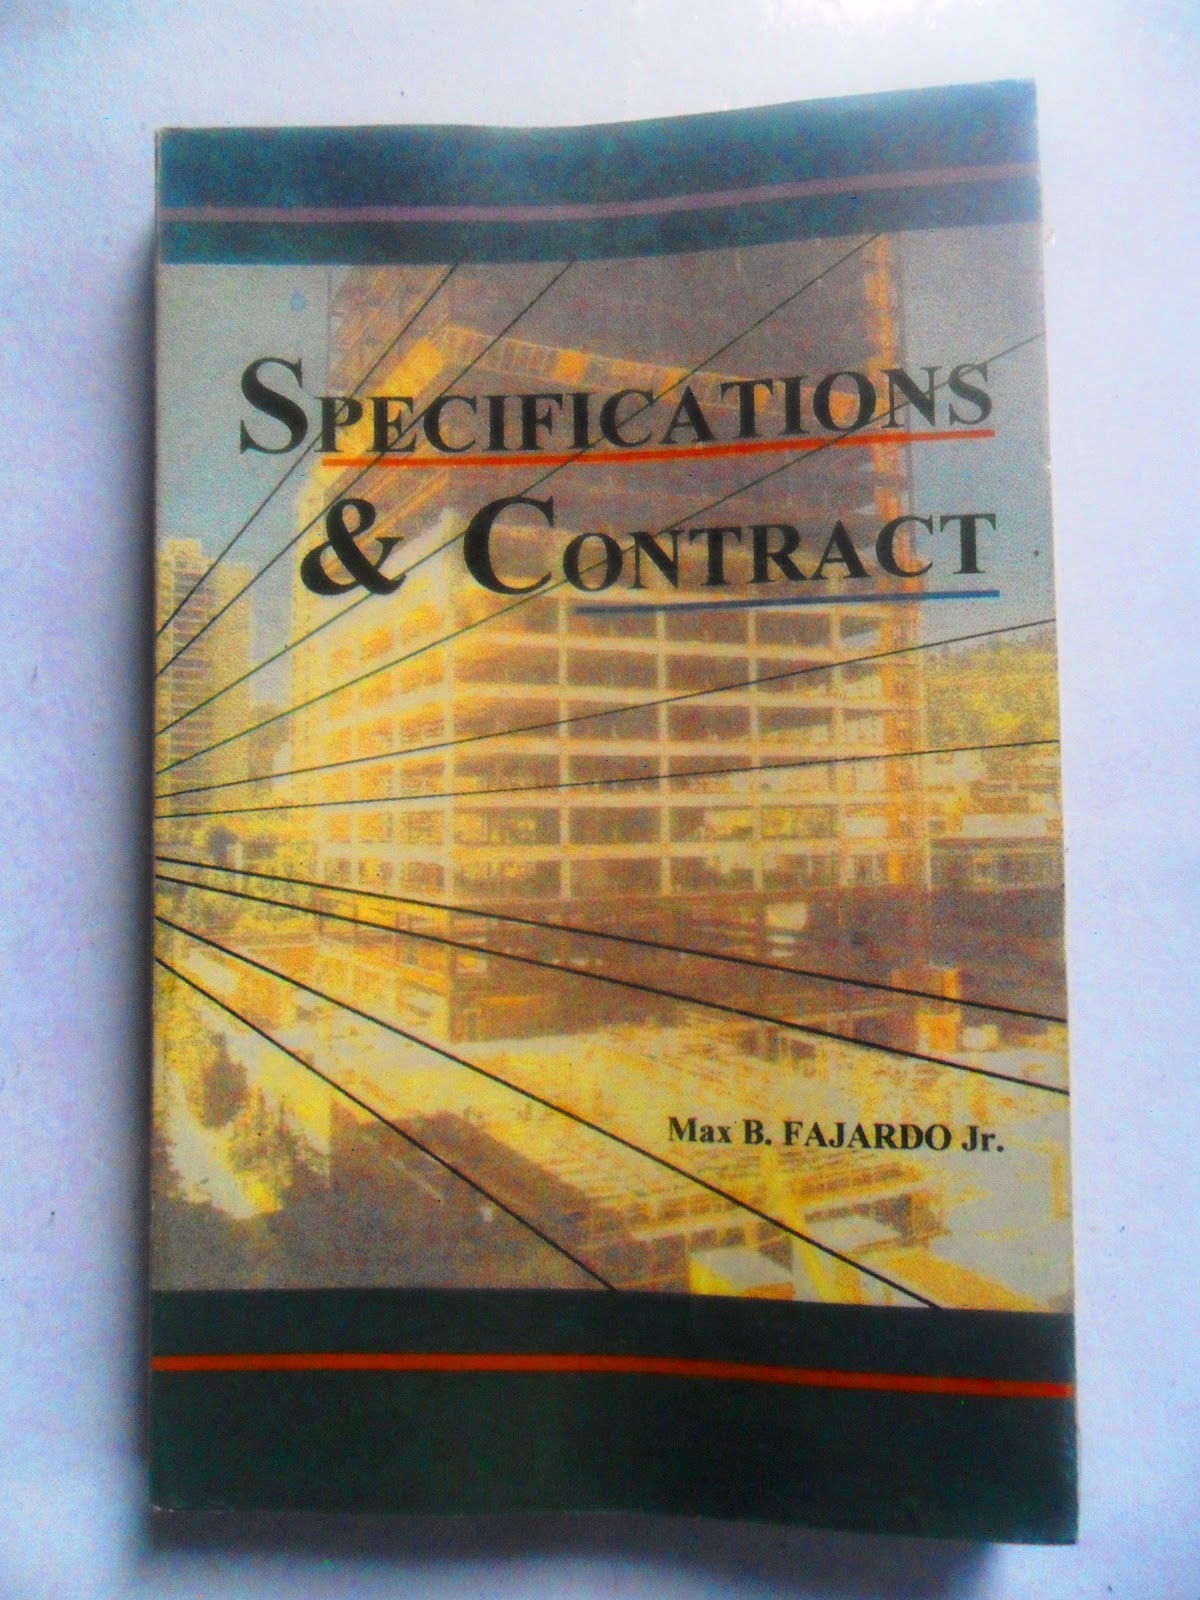 ce laws contracts specifications and ethics pdf